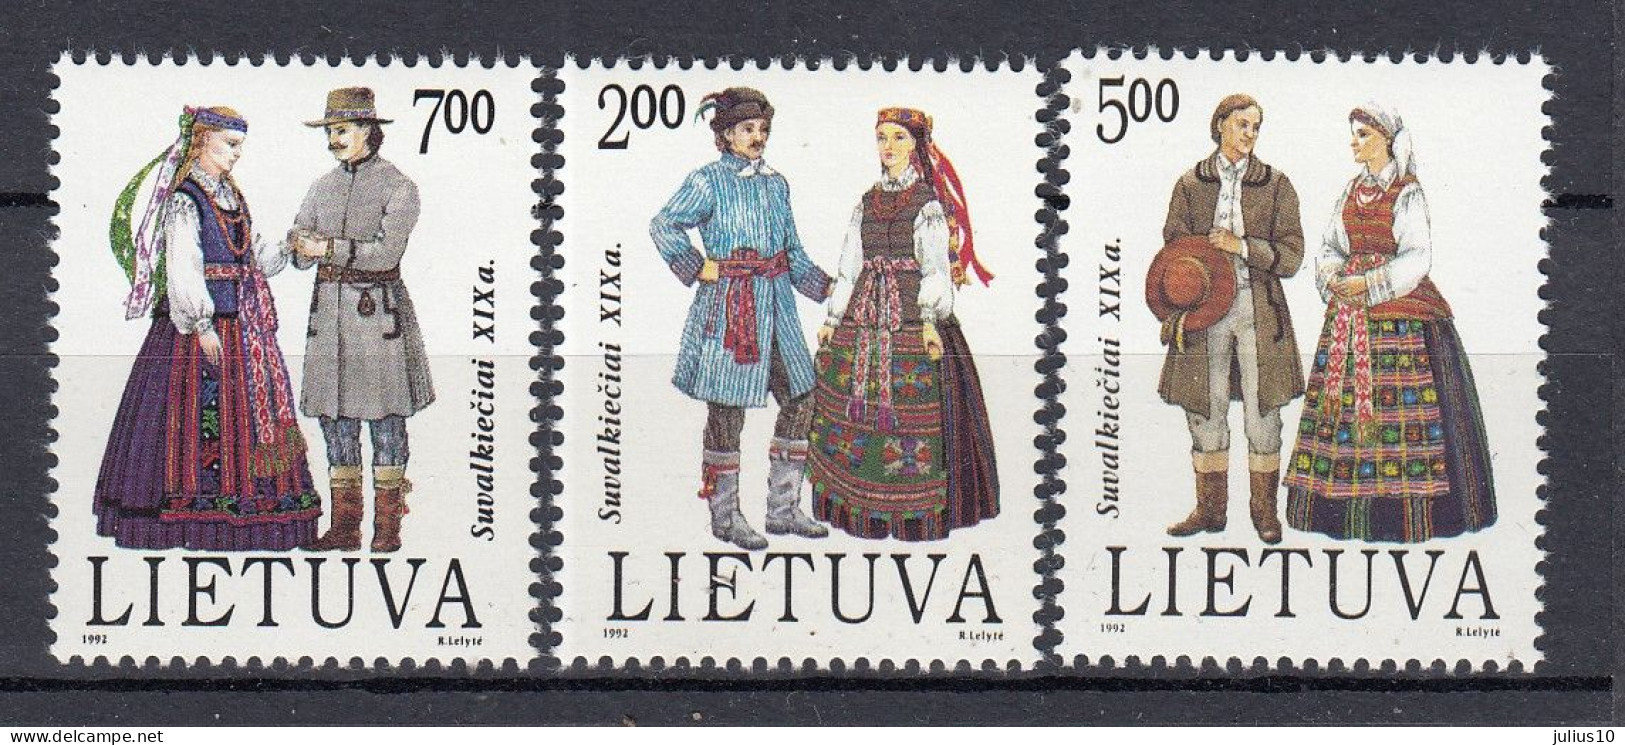 LITHUANIA 1992 National Costumes MNH(**) Mi 508-510 #Lt1178 - Costumes